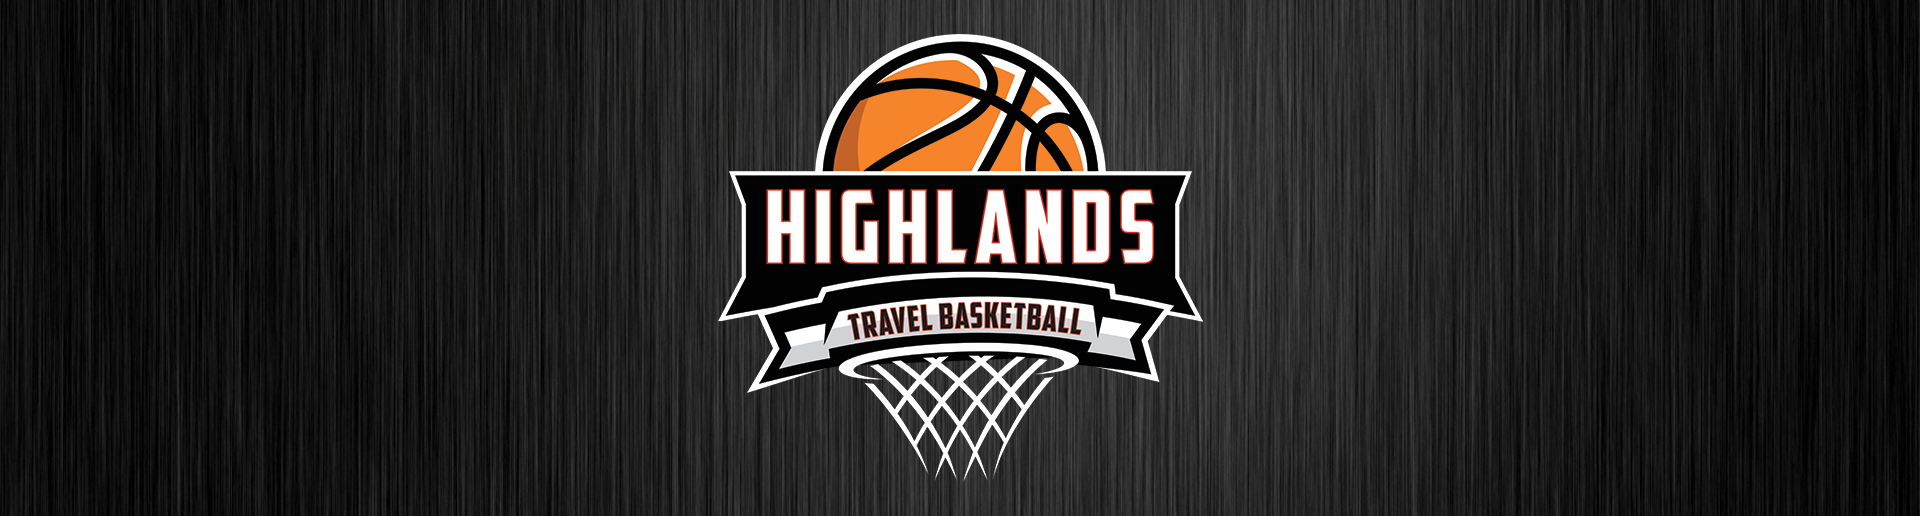 Welcome to Highlands Travel Basketball